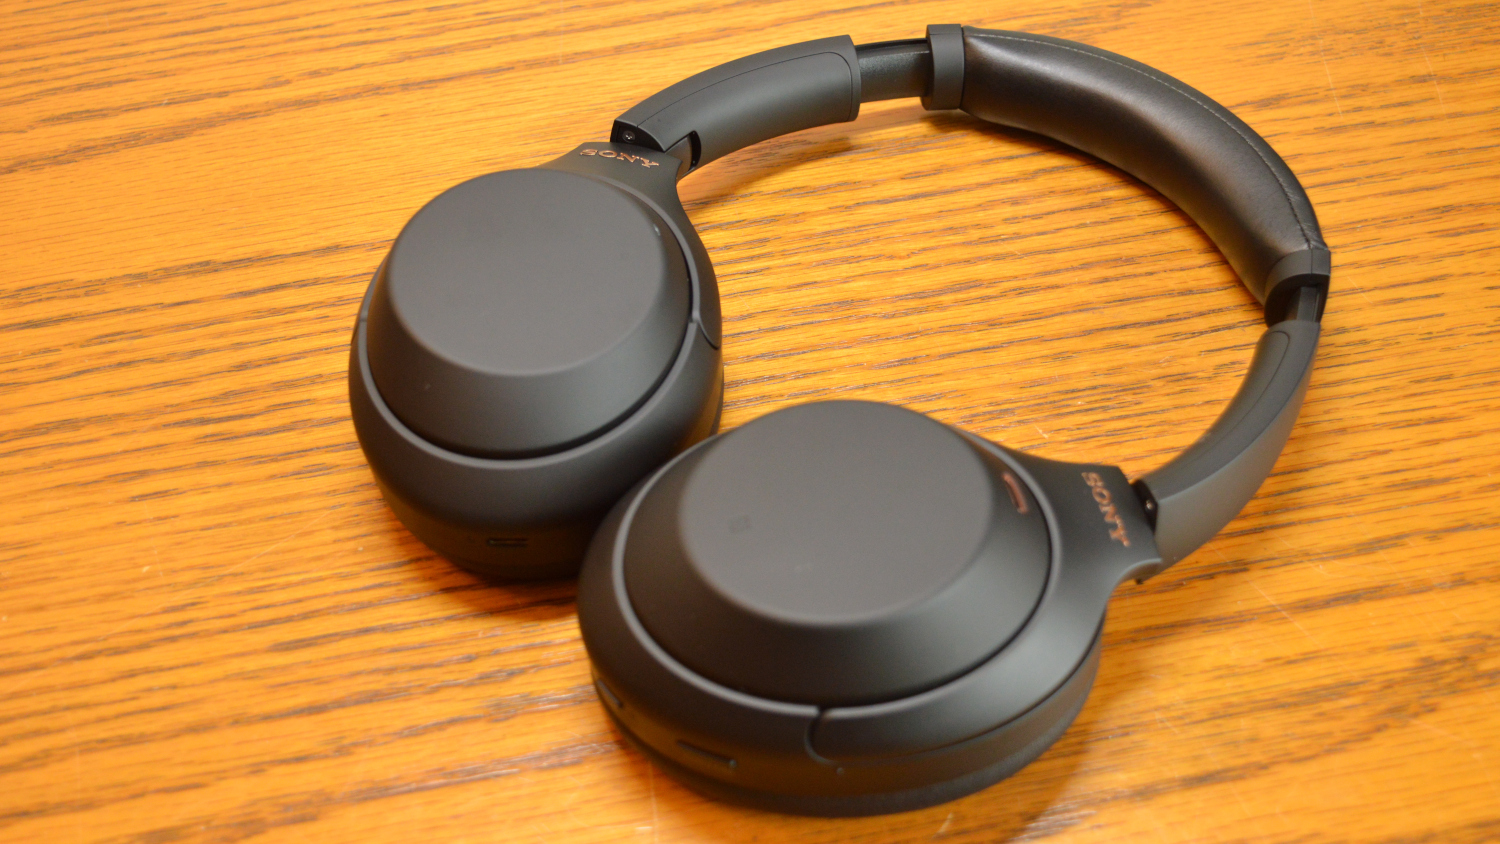 Sony WH-1000XM3 vs Sony WH-1000XM4: which over-ear headphones are